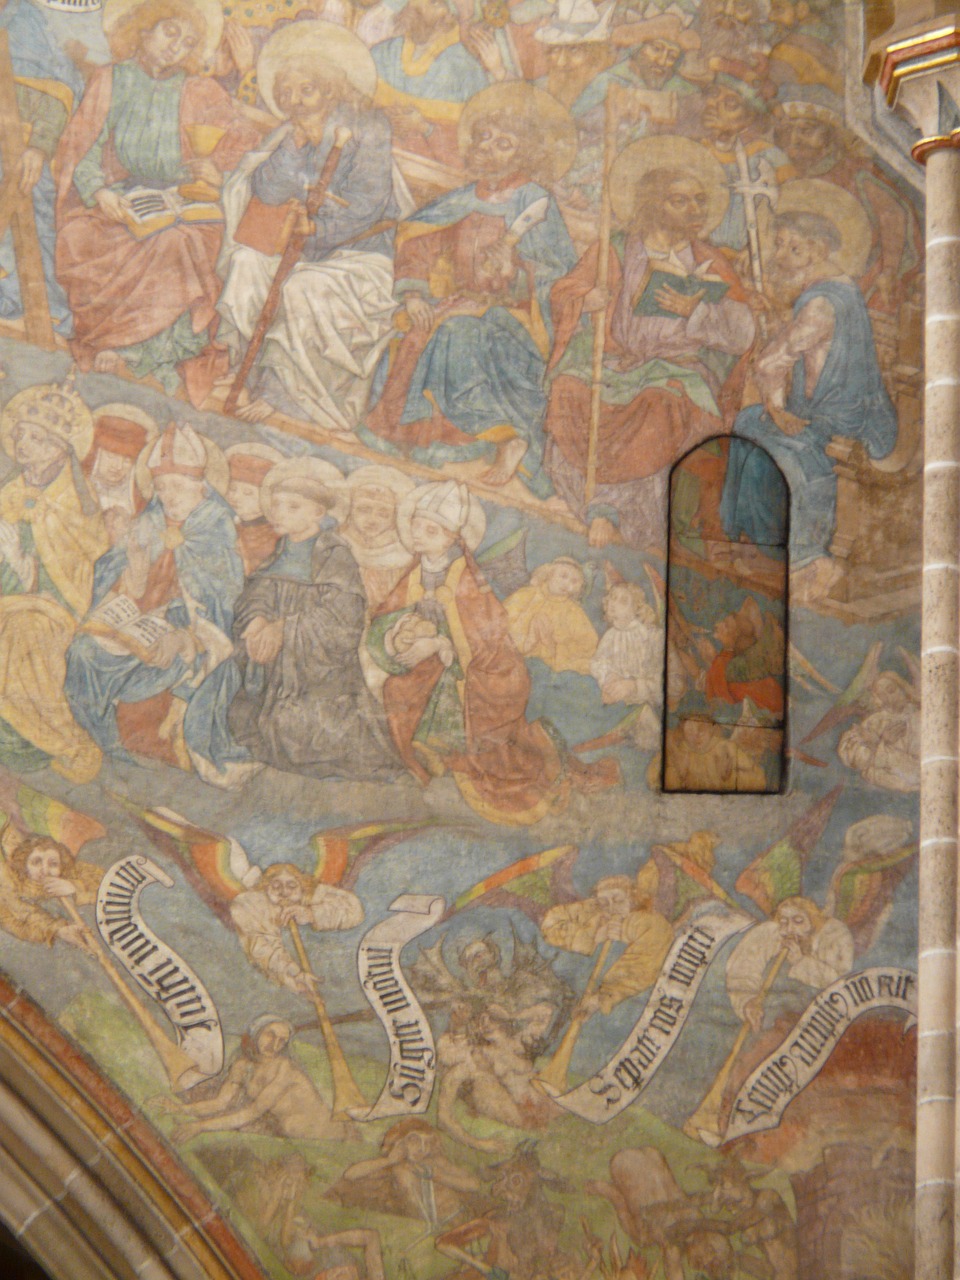 ulm cathedral fresco the most recent court free photo